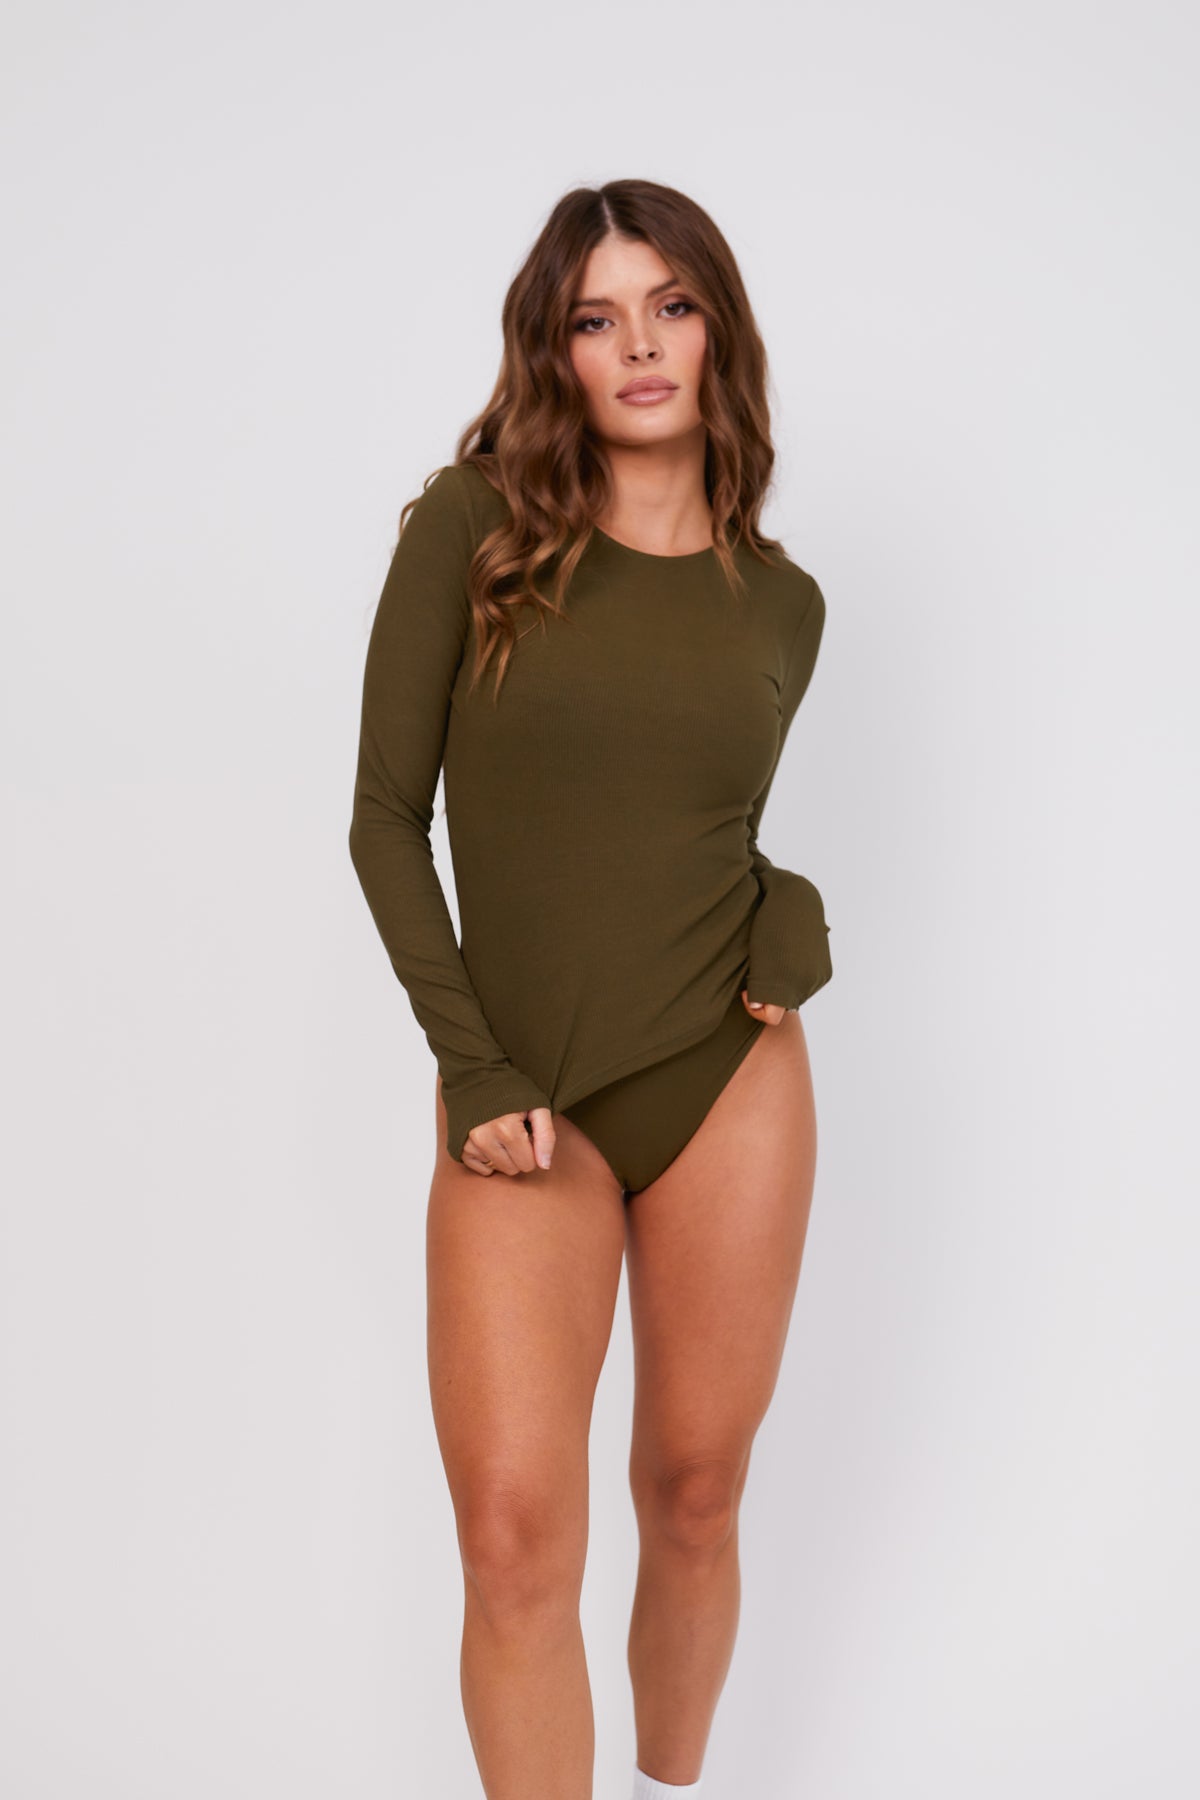 ARMY GREEN LONG SLEEVE TOP